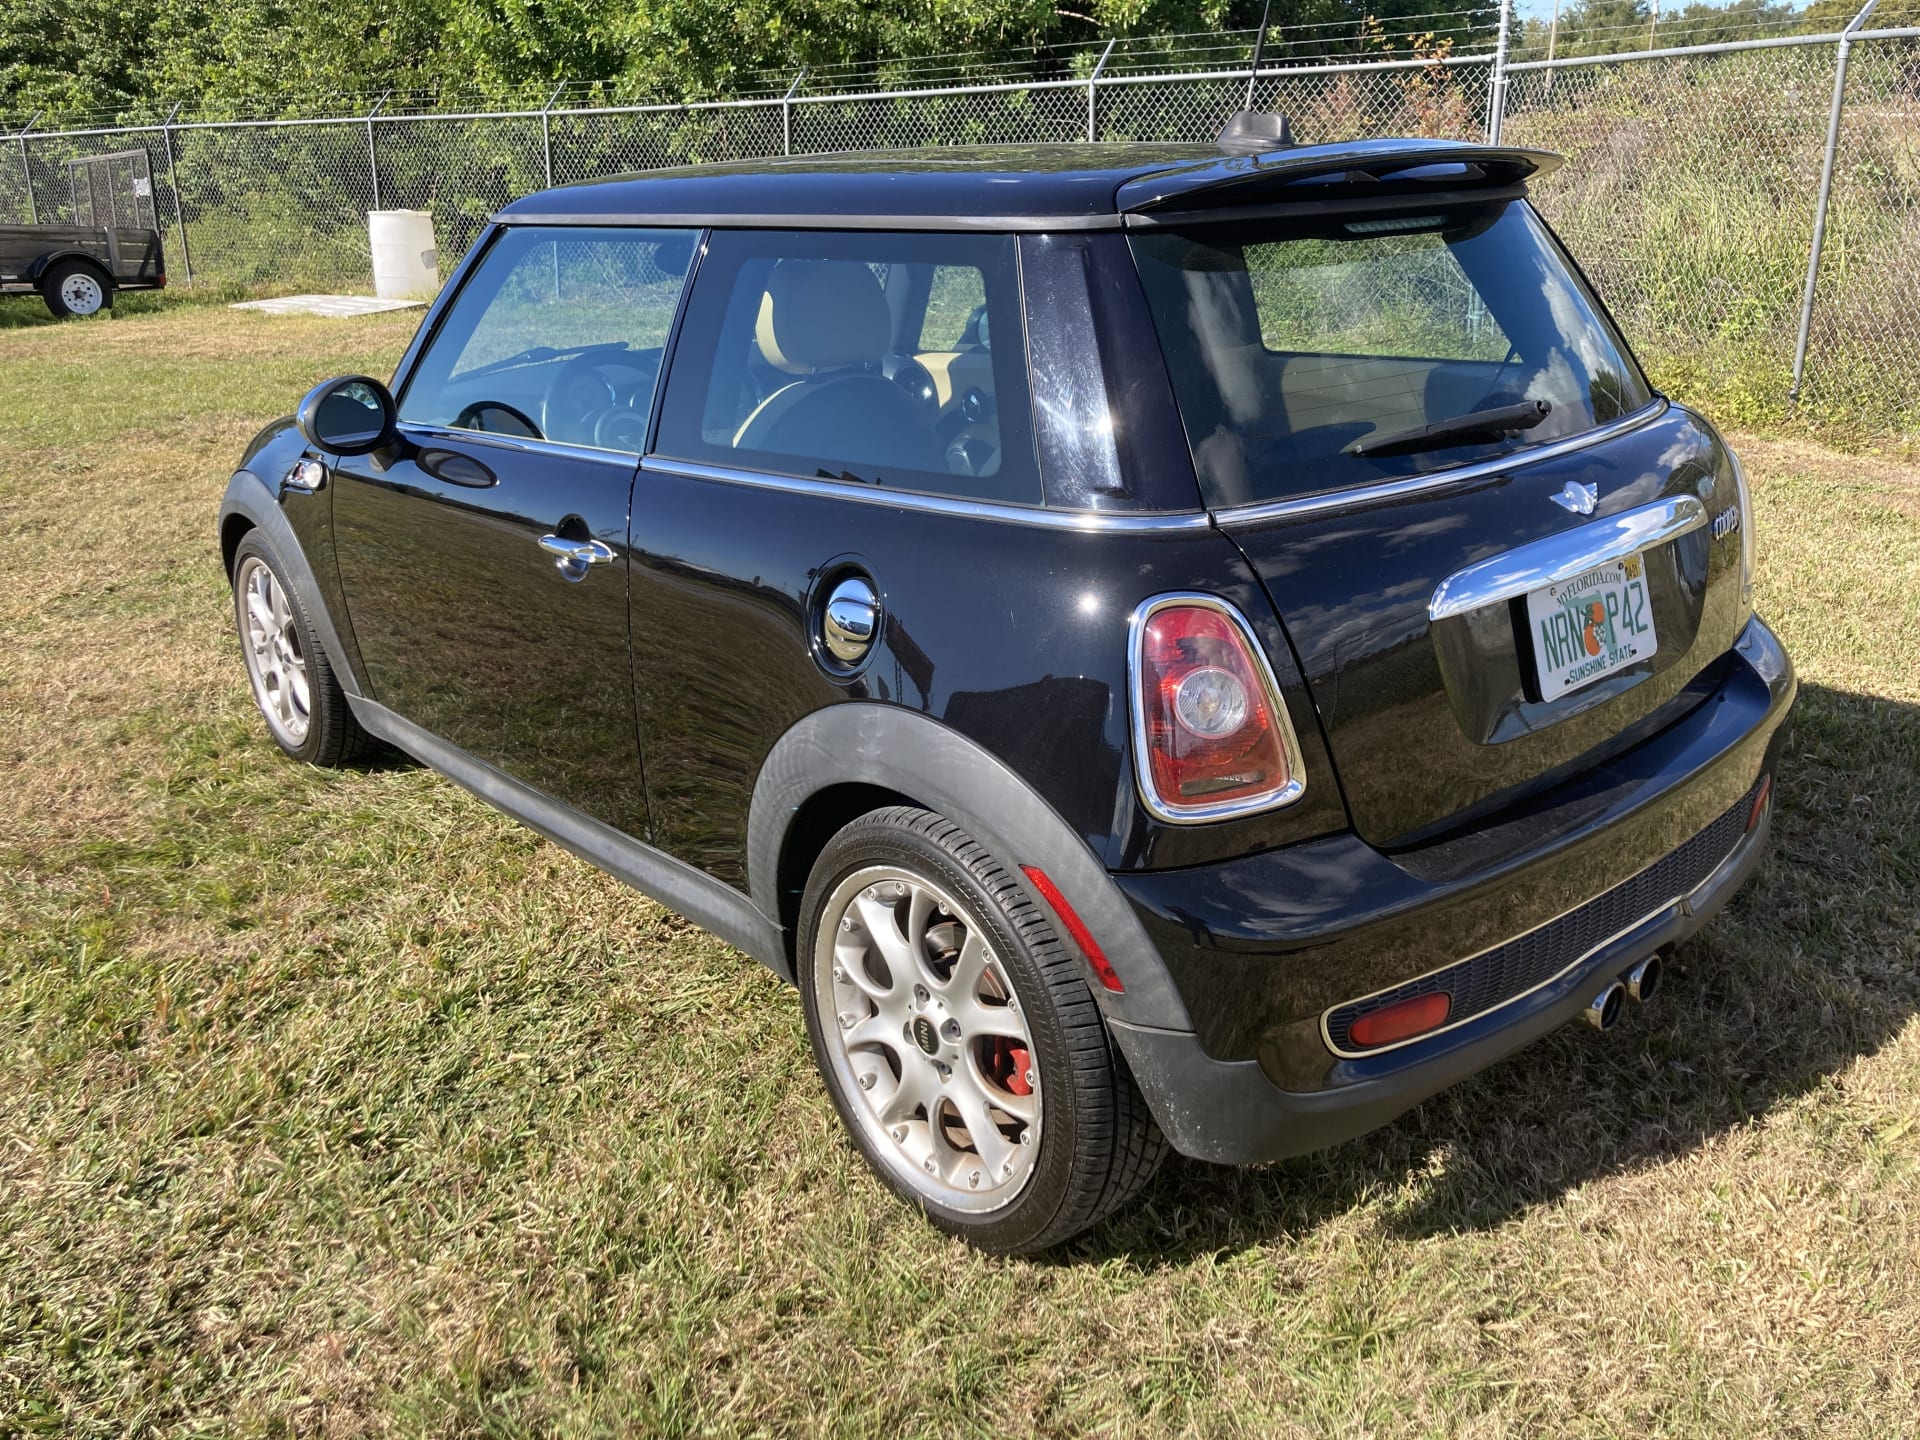 2010 Mini Cooper S at Kissimmee 2021 as L219 - Mecum Auctions